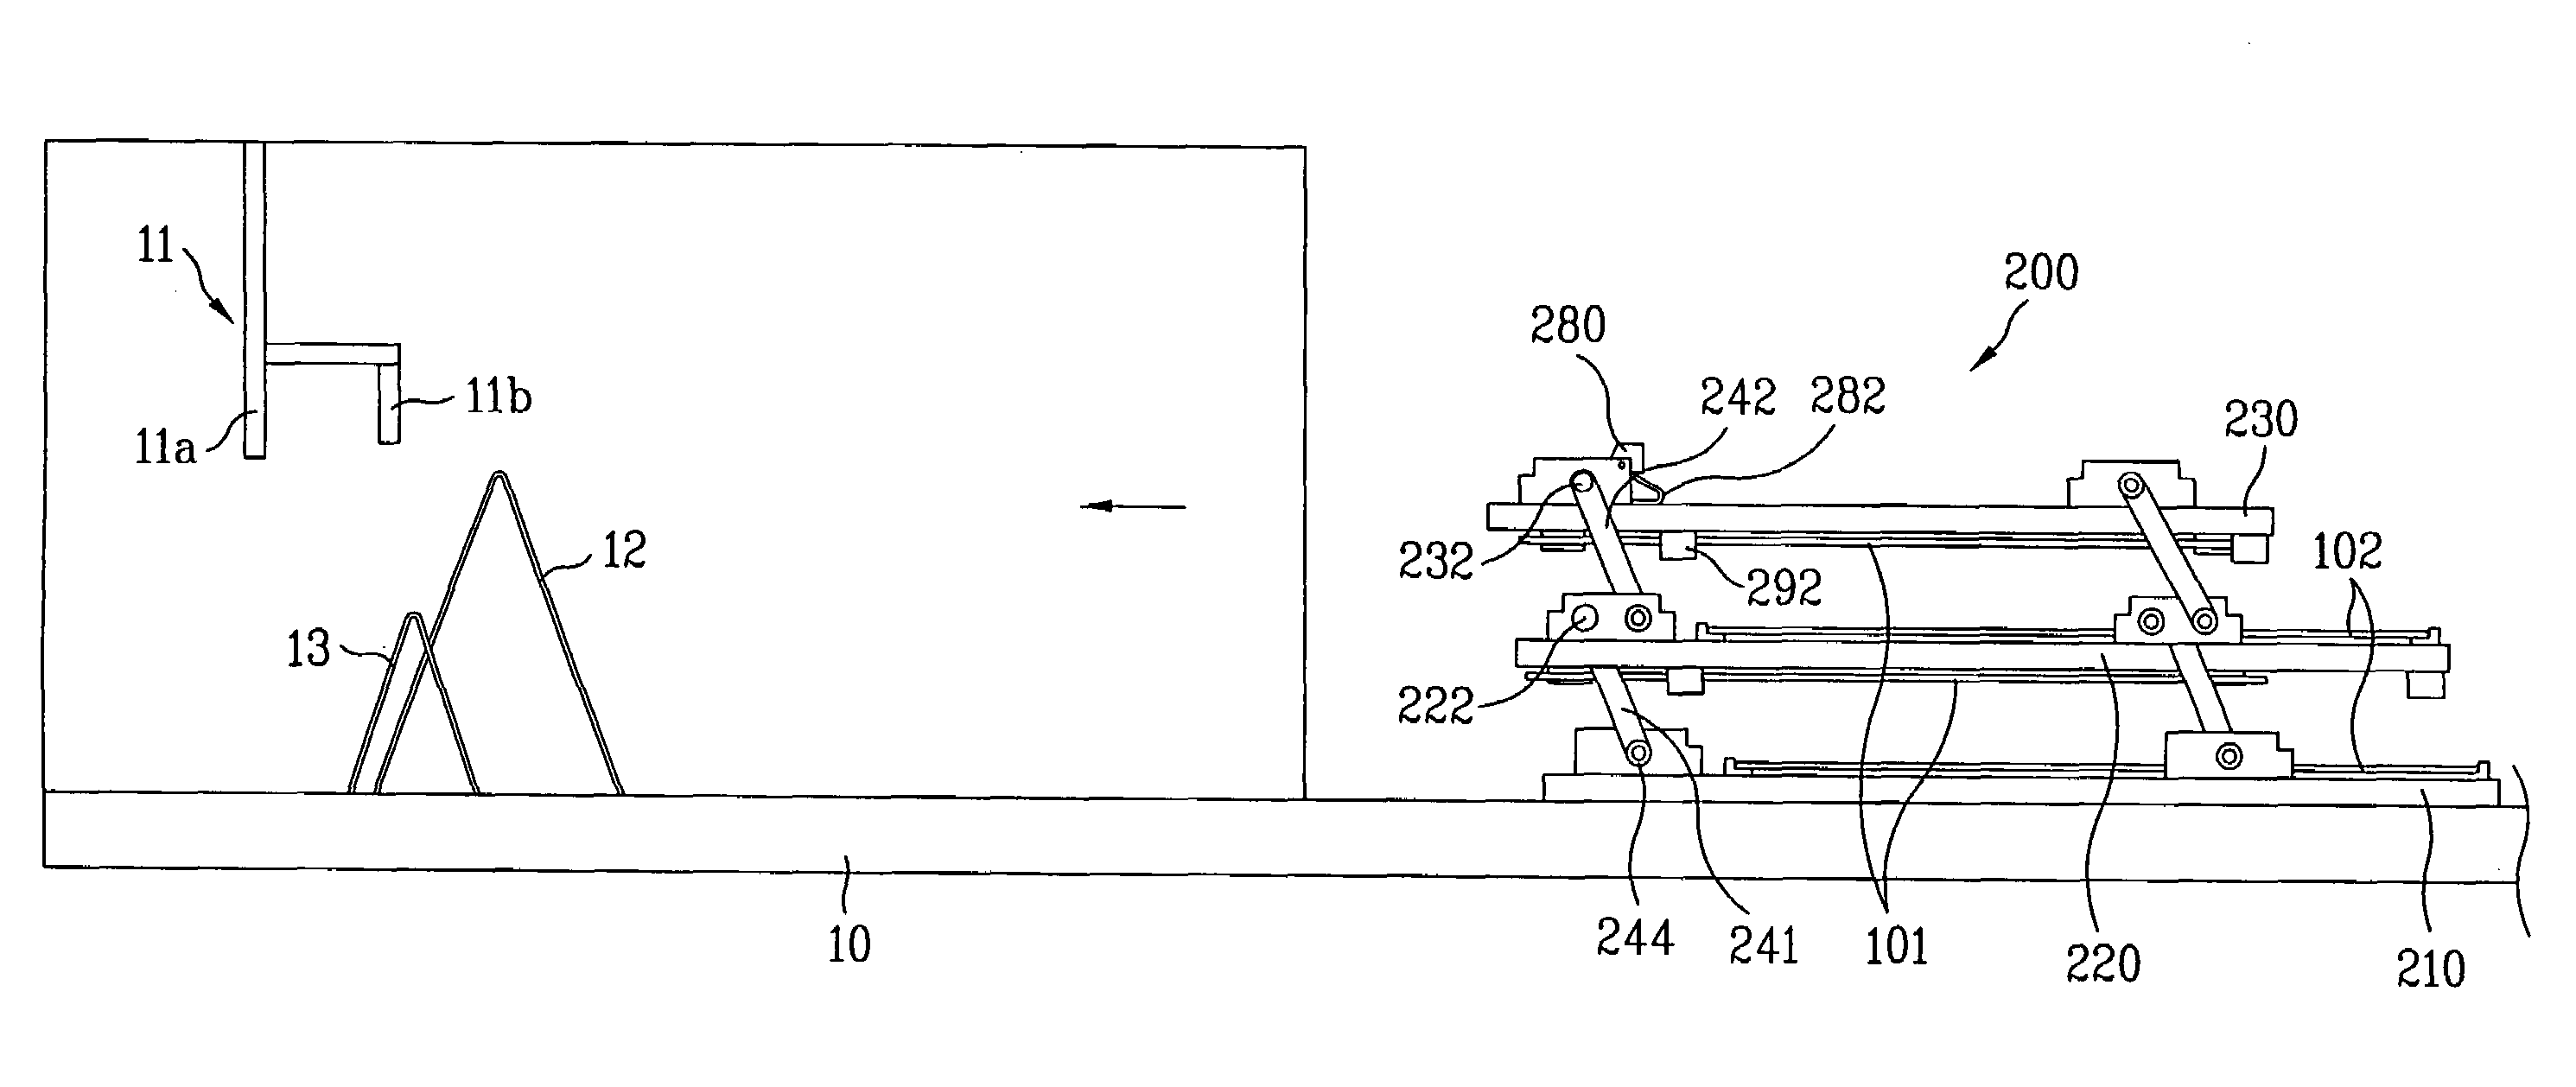 Apparatus for assembling substrates of planar fluorescent lamp